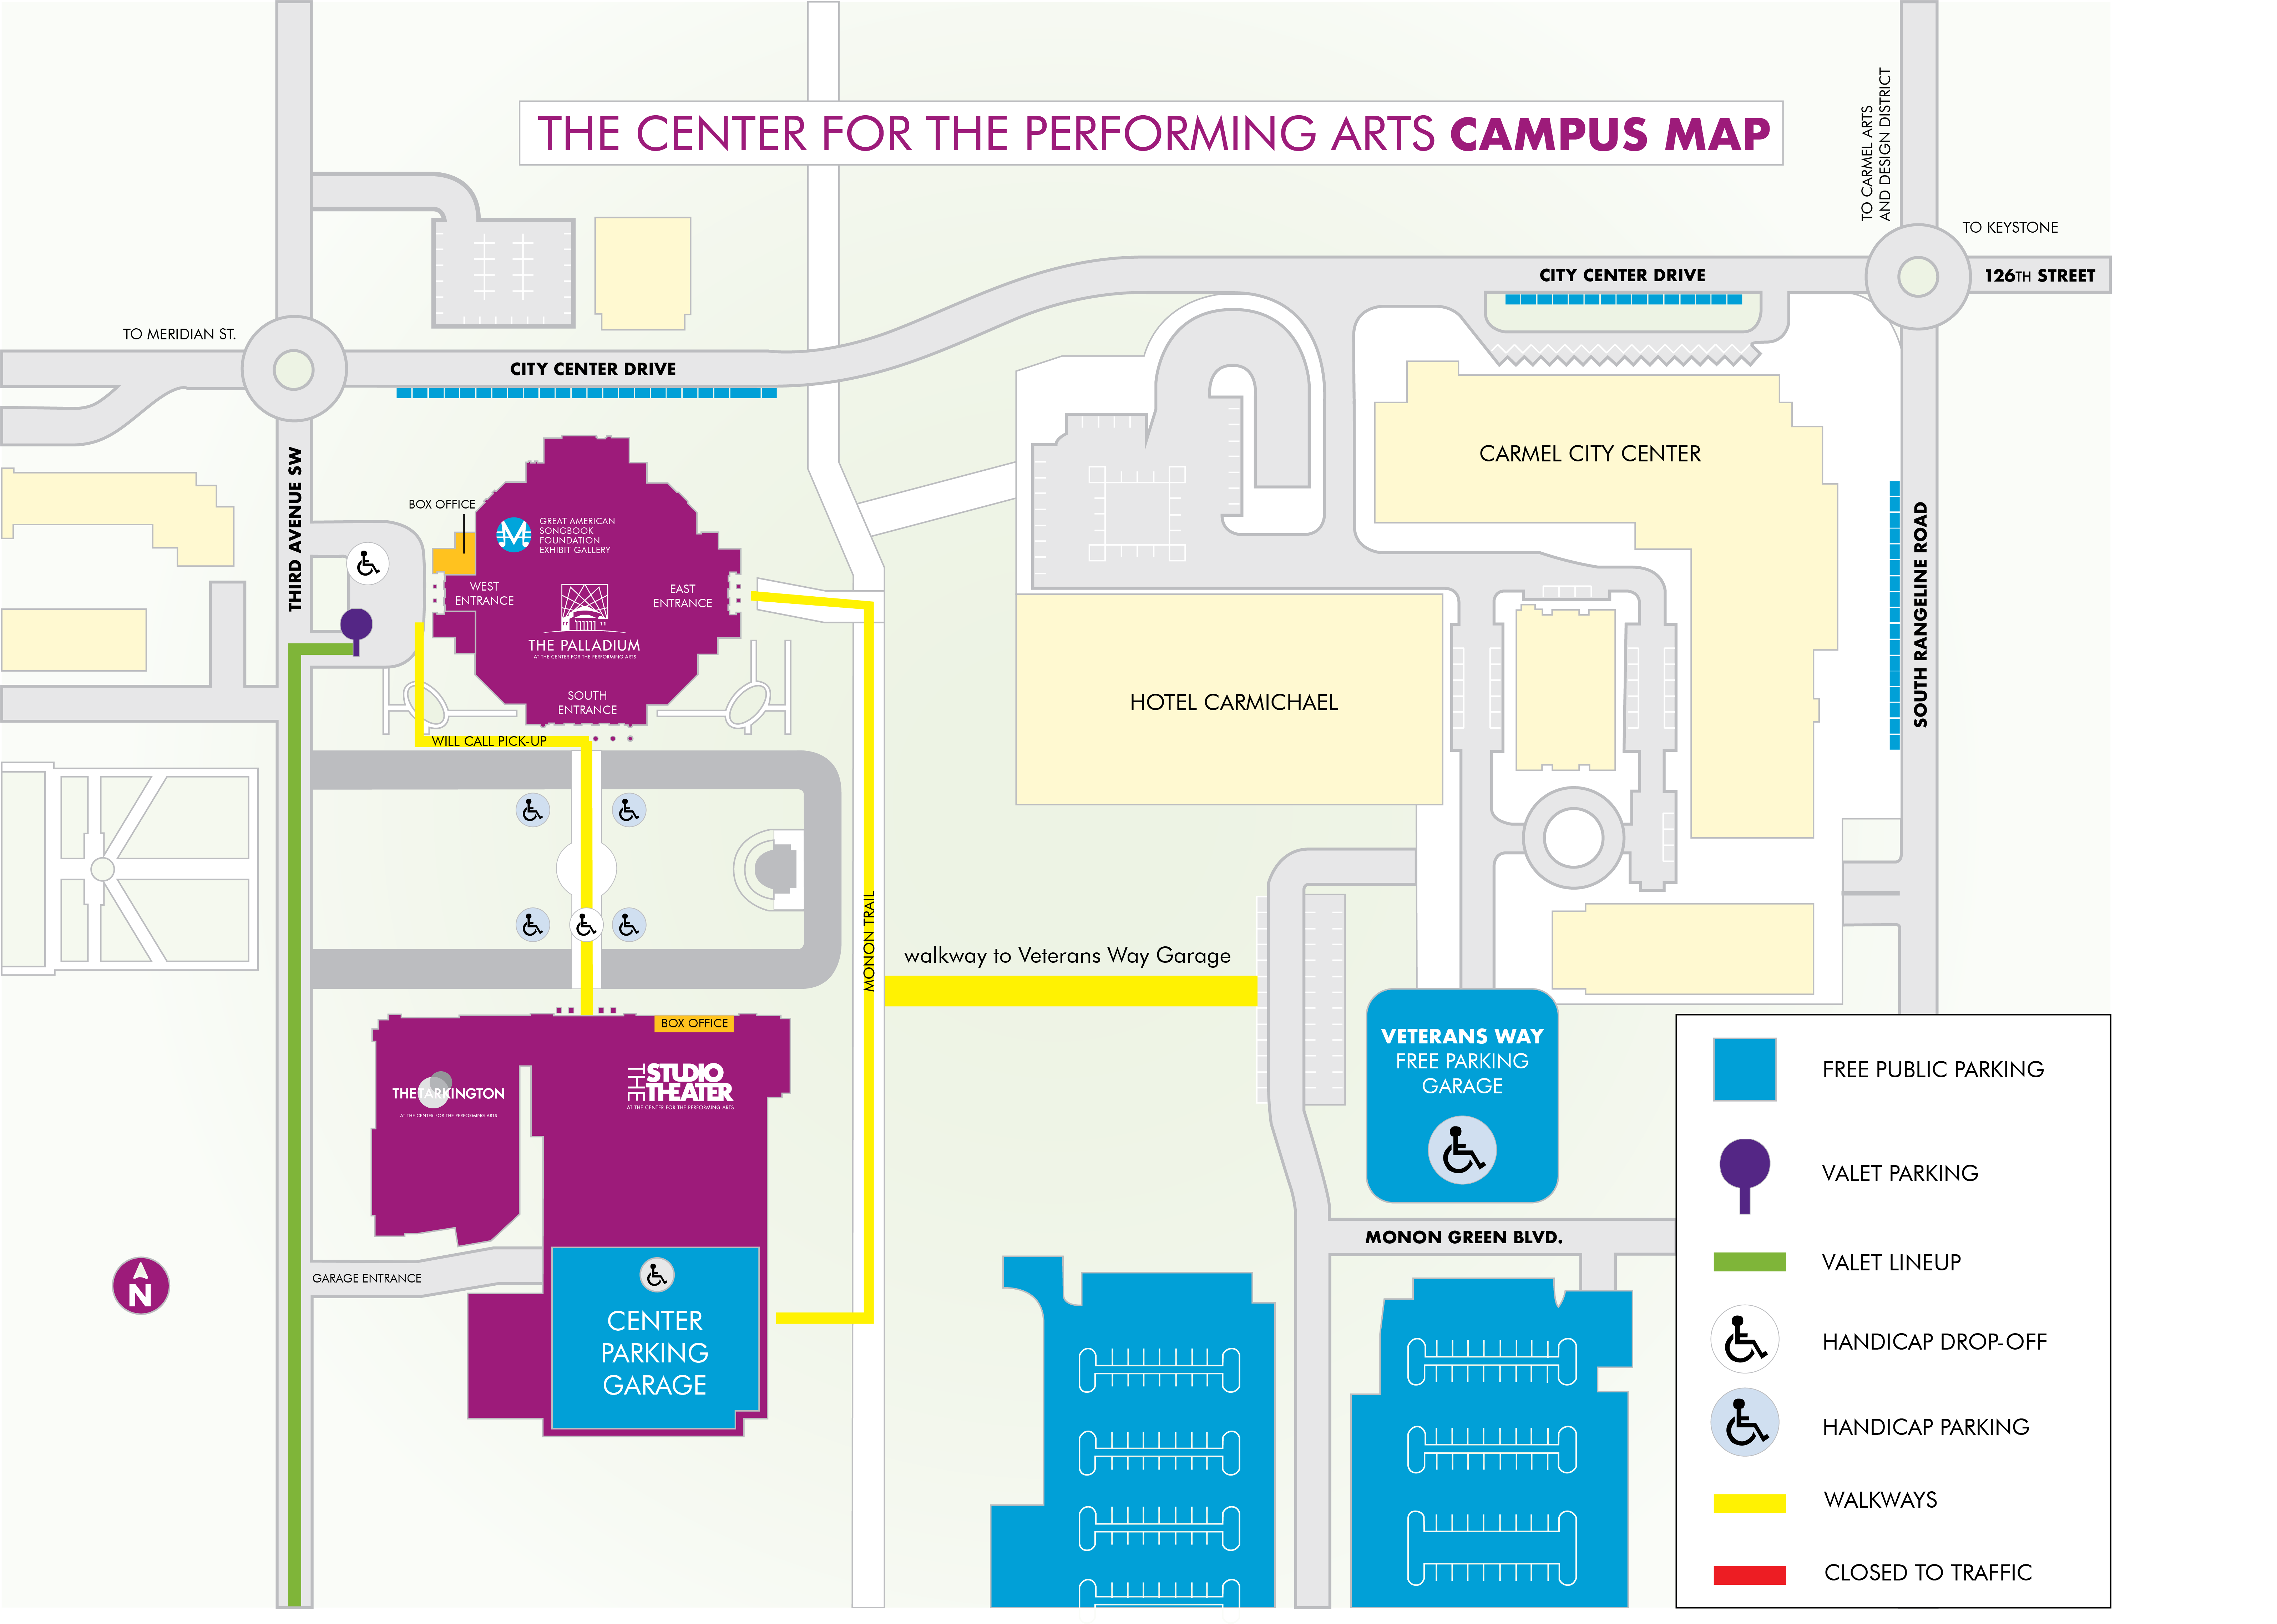 Parking at the Center for the Performing Arts. Free parking available in Center Parking Garage off of 3rd Avenue or Veterans Way Parking Garage at City Center off of Rangeline Road.